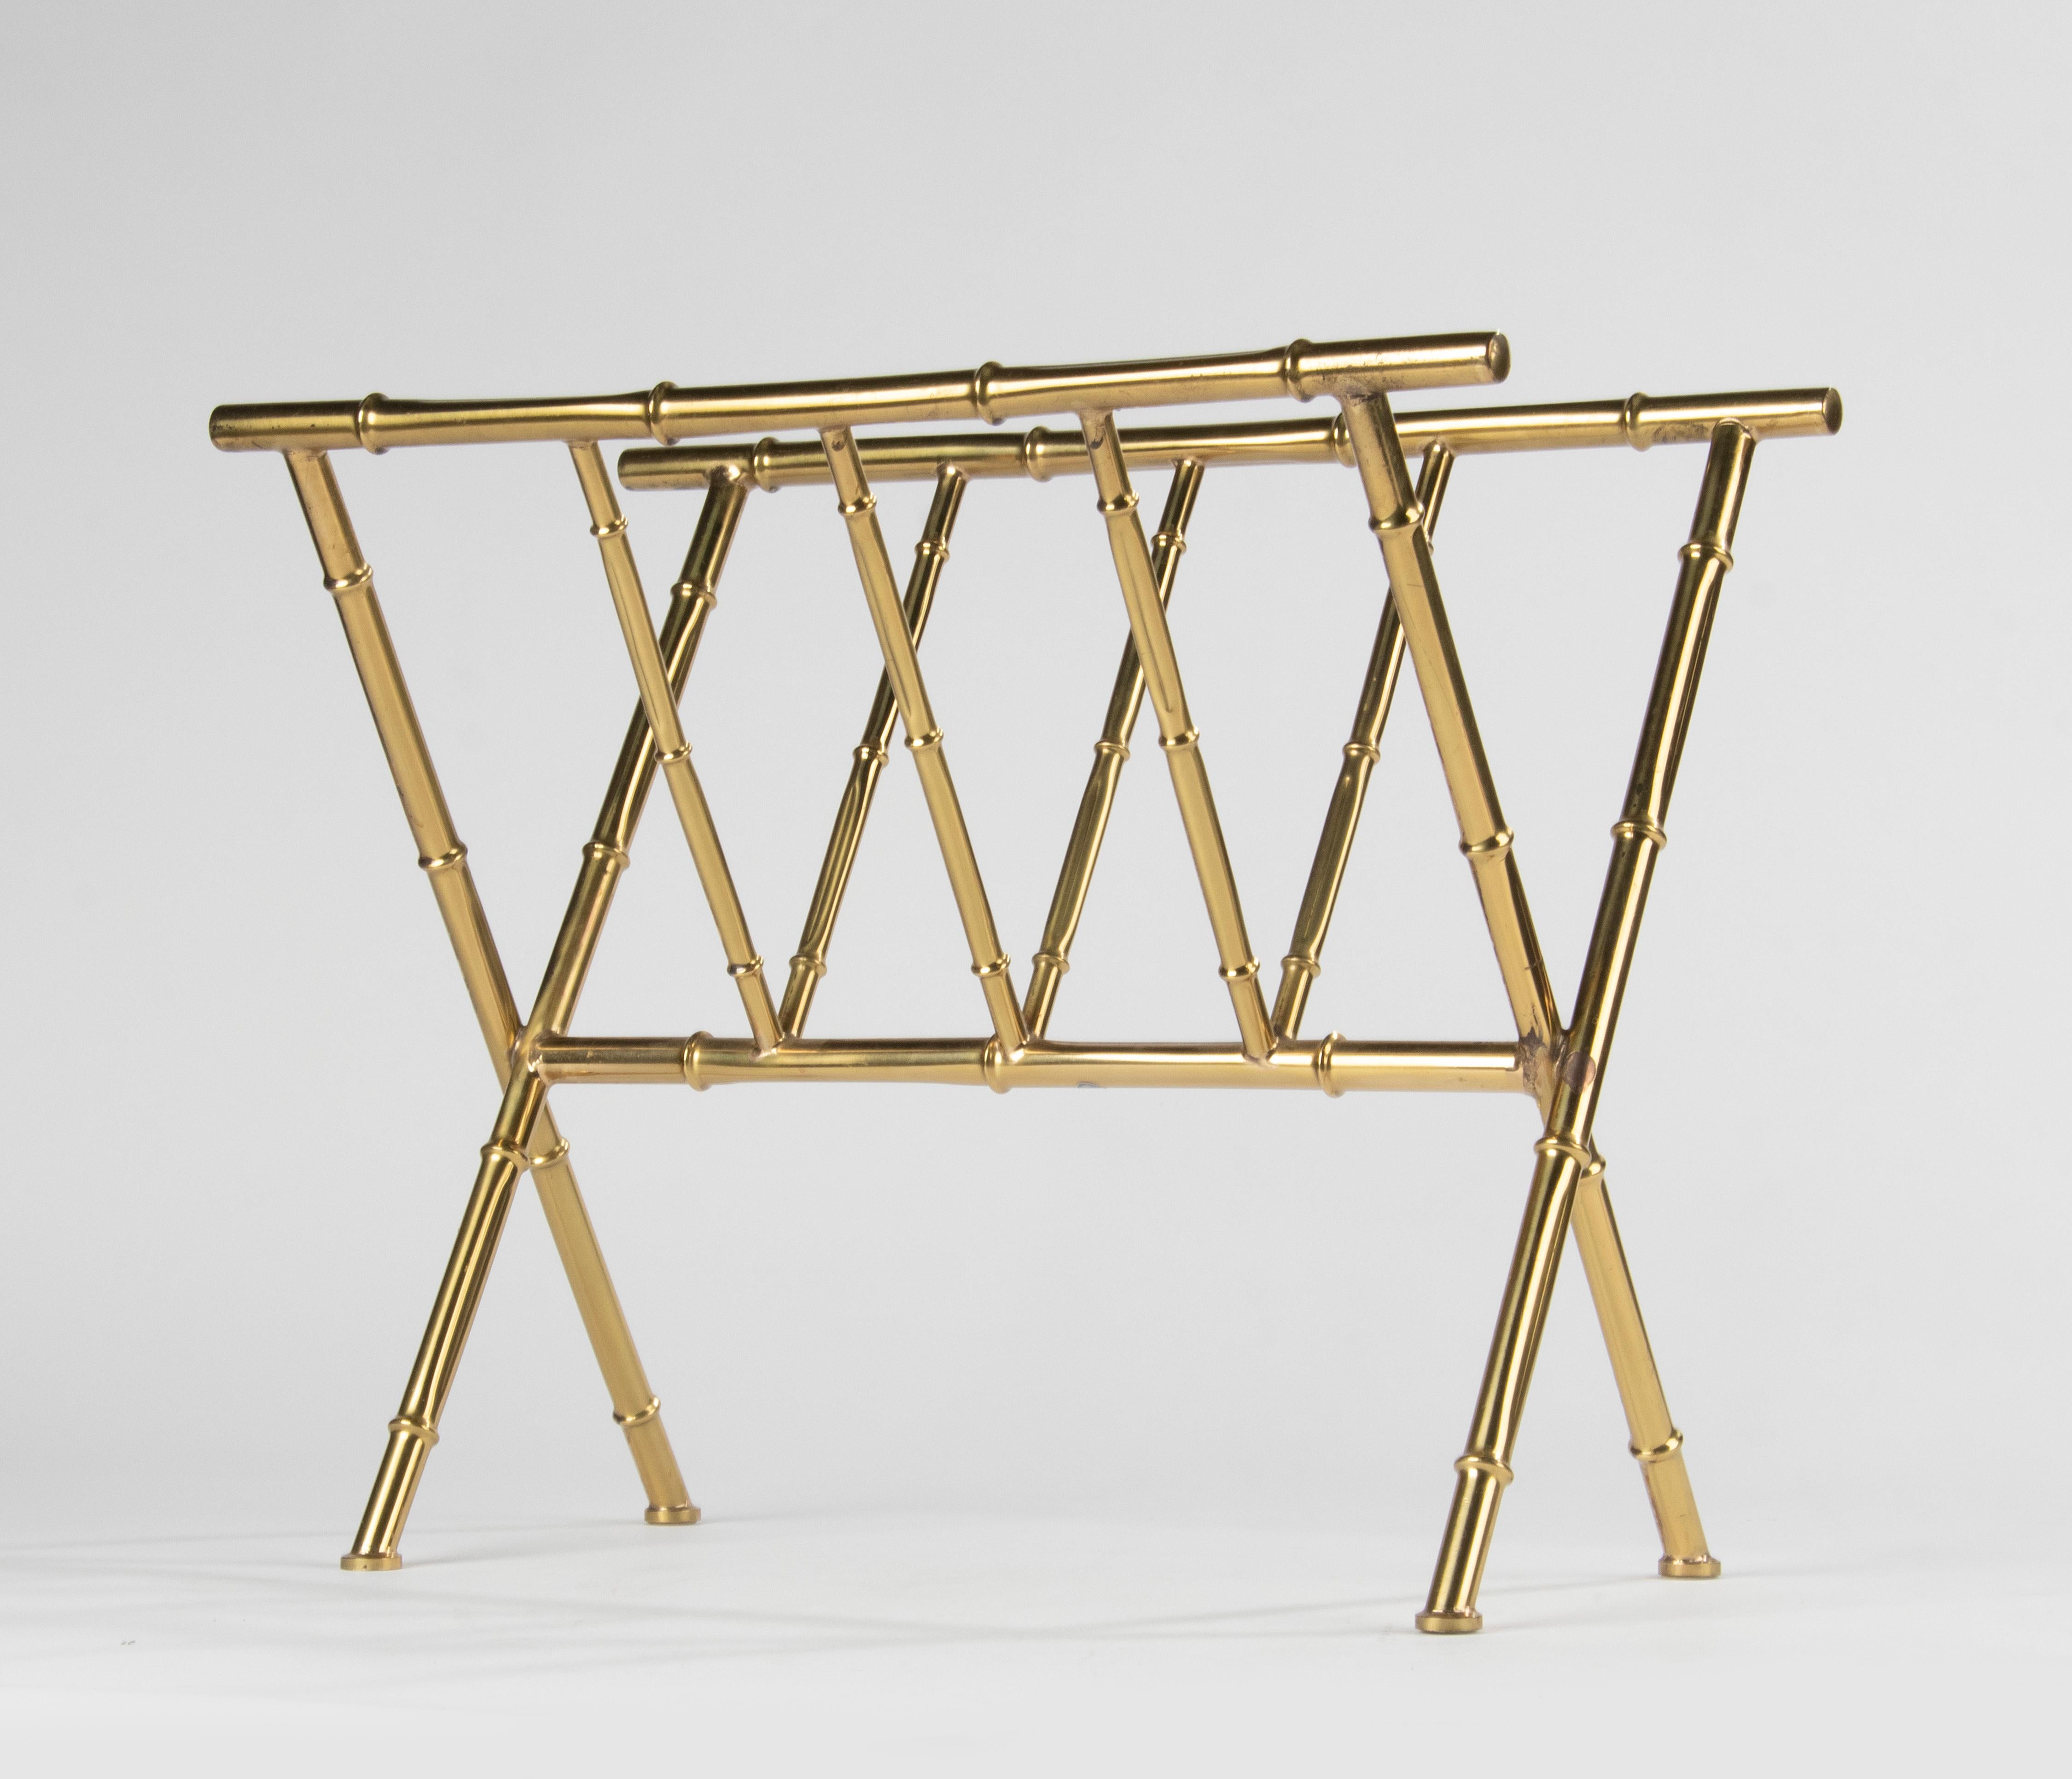 A vintage brass colored faux bamboo magazine rack in the style Maison Bagués. Made of brass colored metal. Made in France, circa 1960-1970
In good and stable condition.
Dimensions: 38 (h) 47 x 25 cm
Free shipping